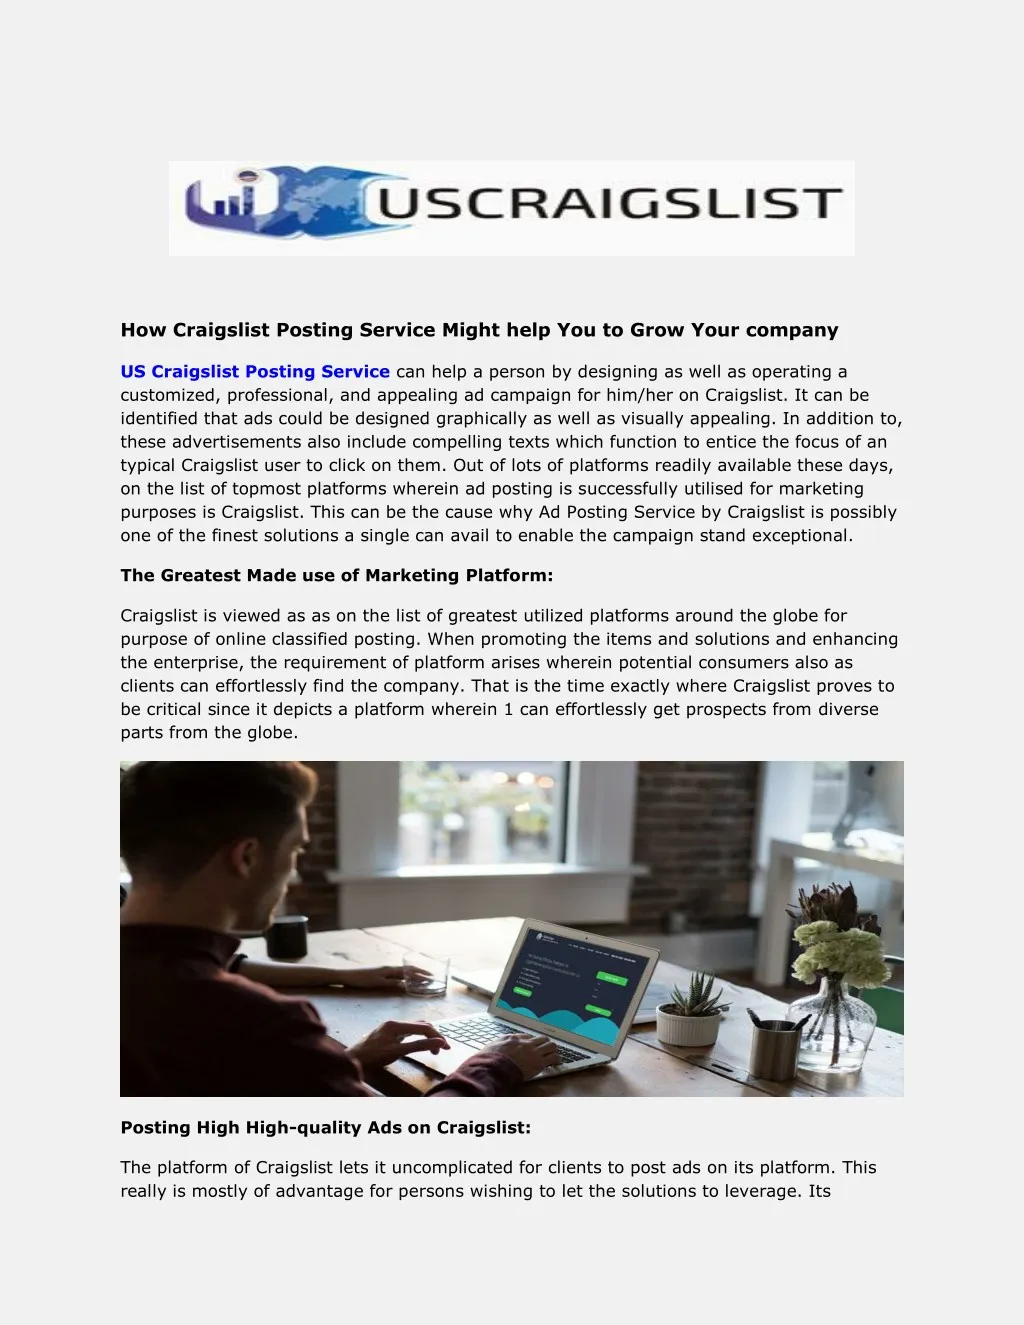 how craigslist posting service might help